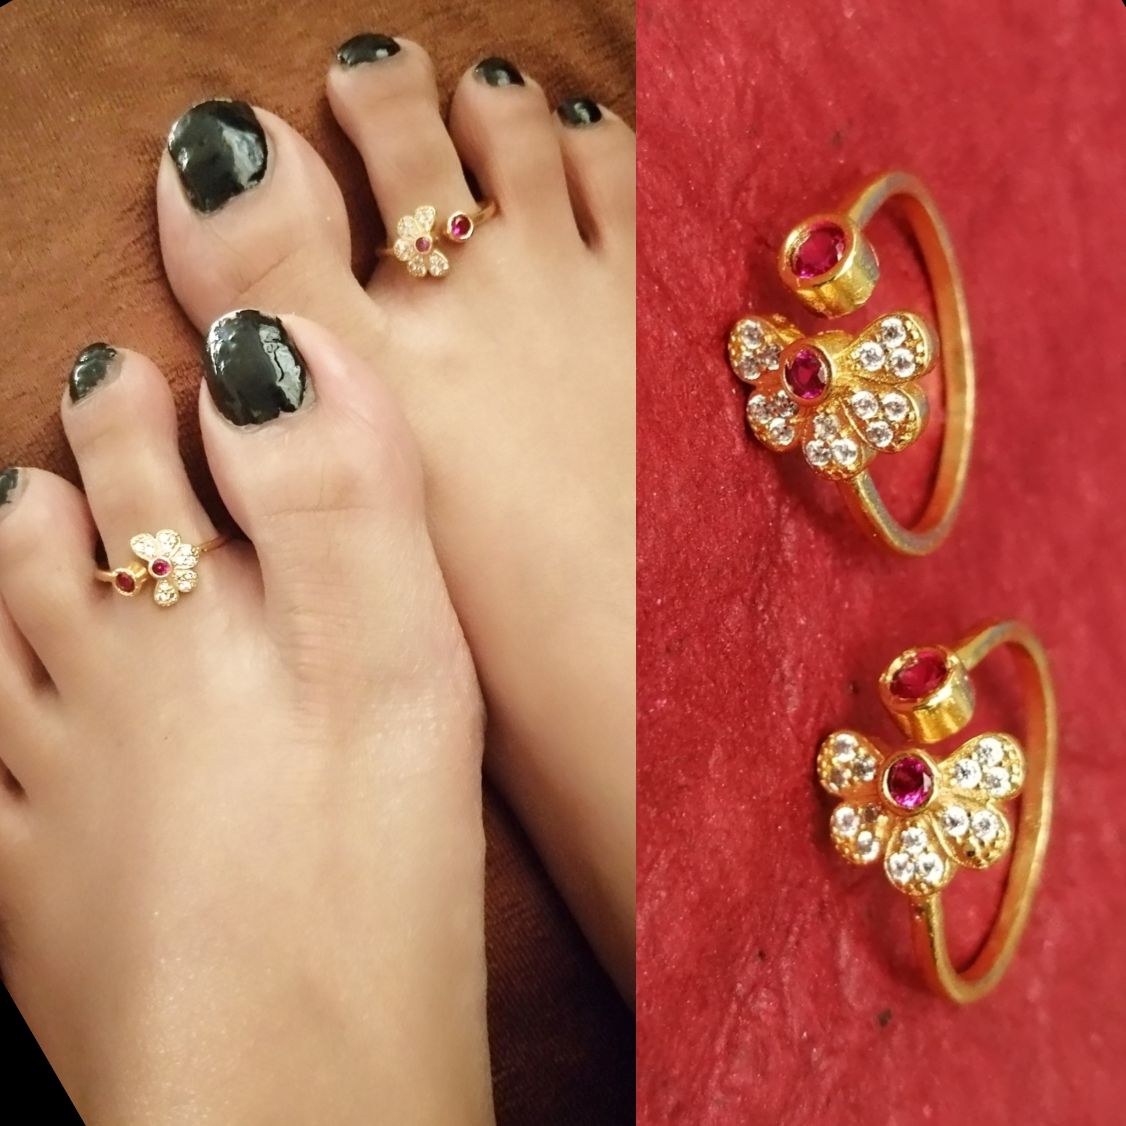 Celebrities Are Trying to Bring Toe Rings Back Into Style